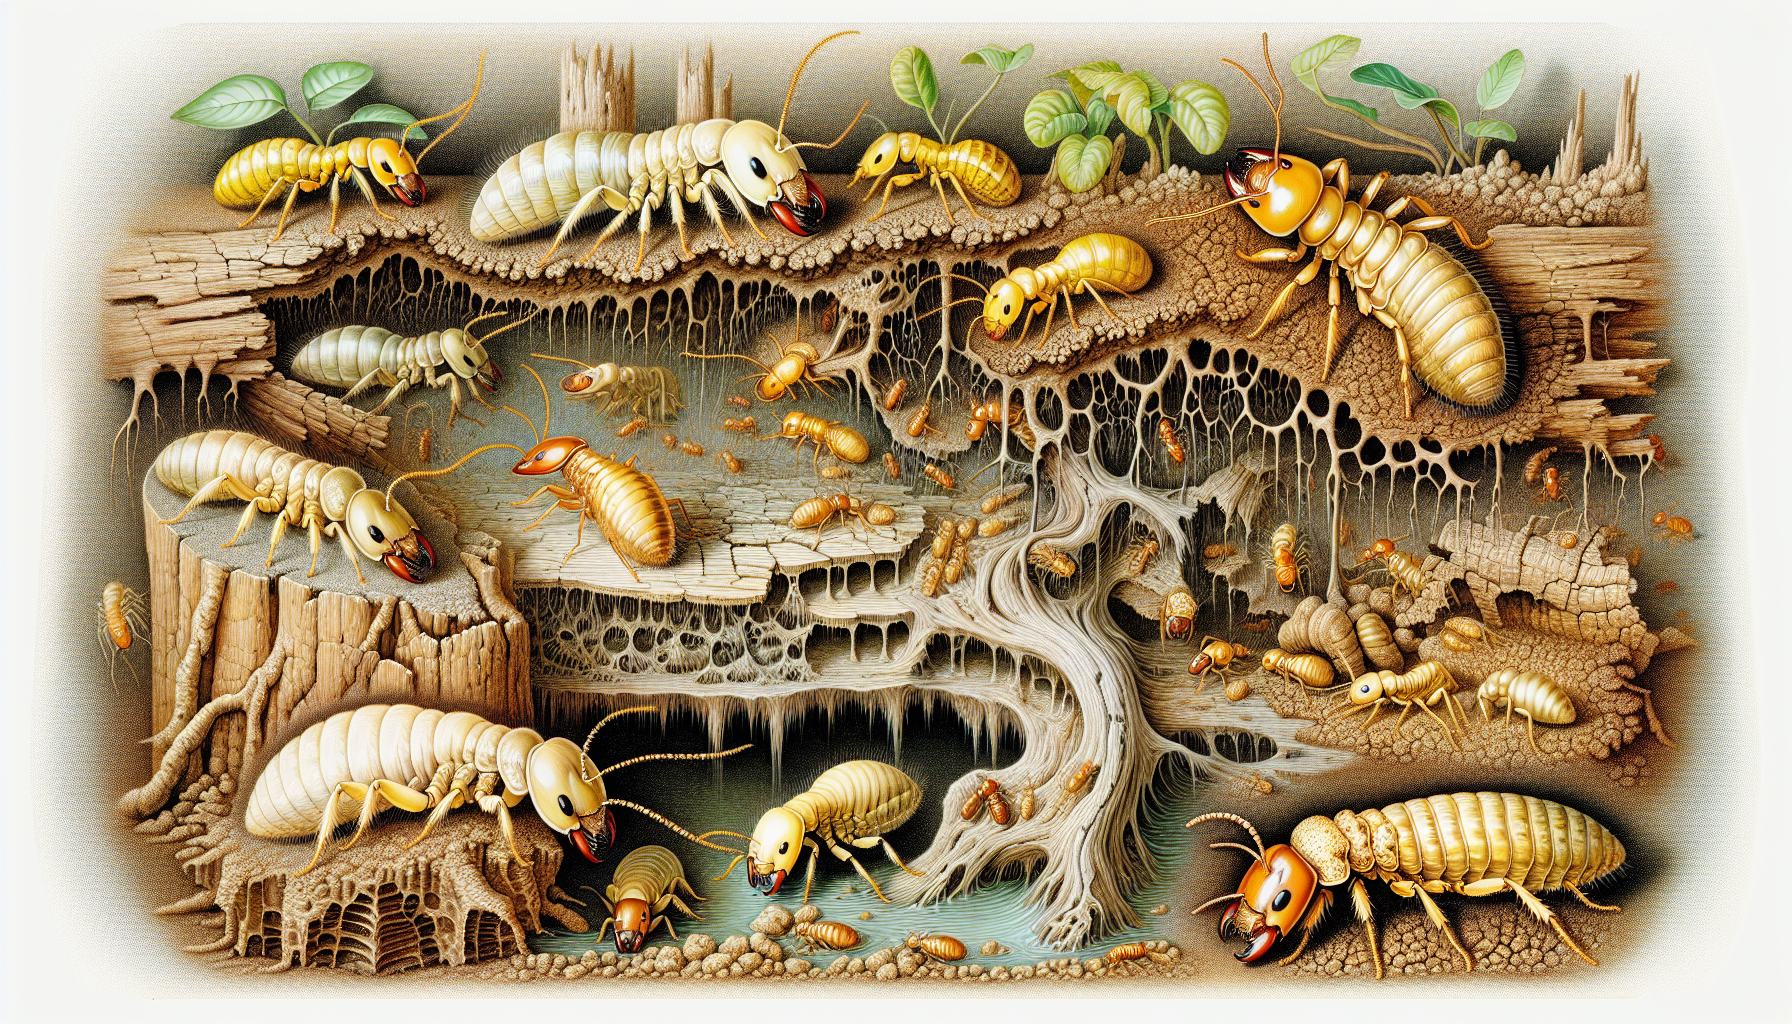 Illustration of different kinds of termites